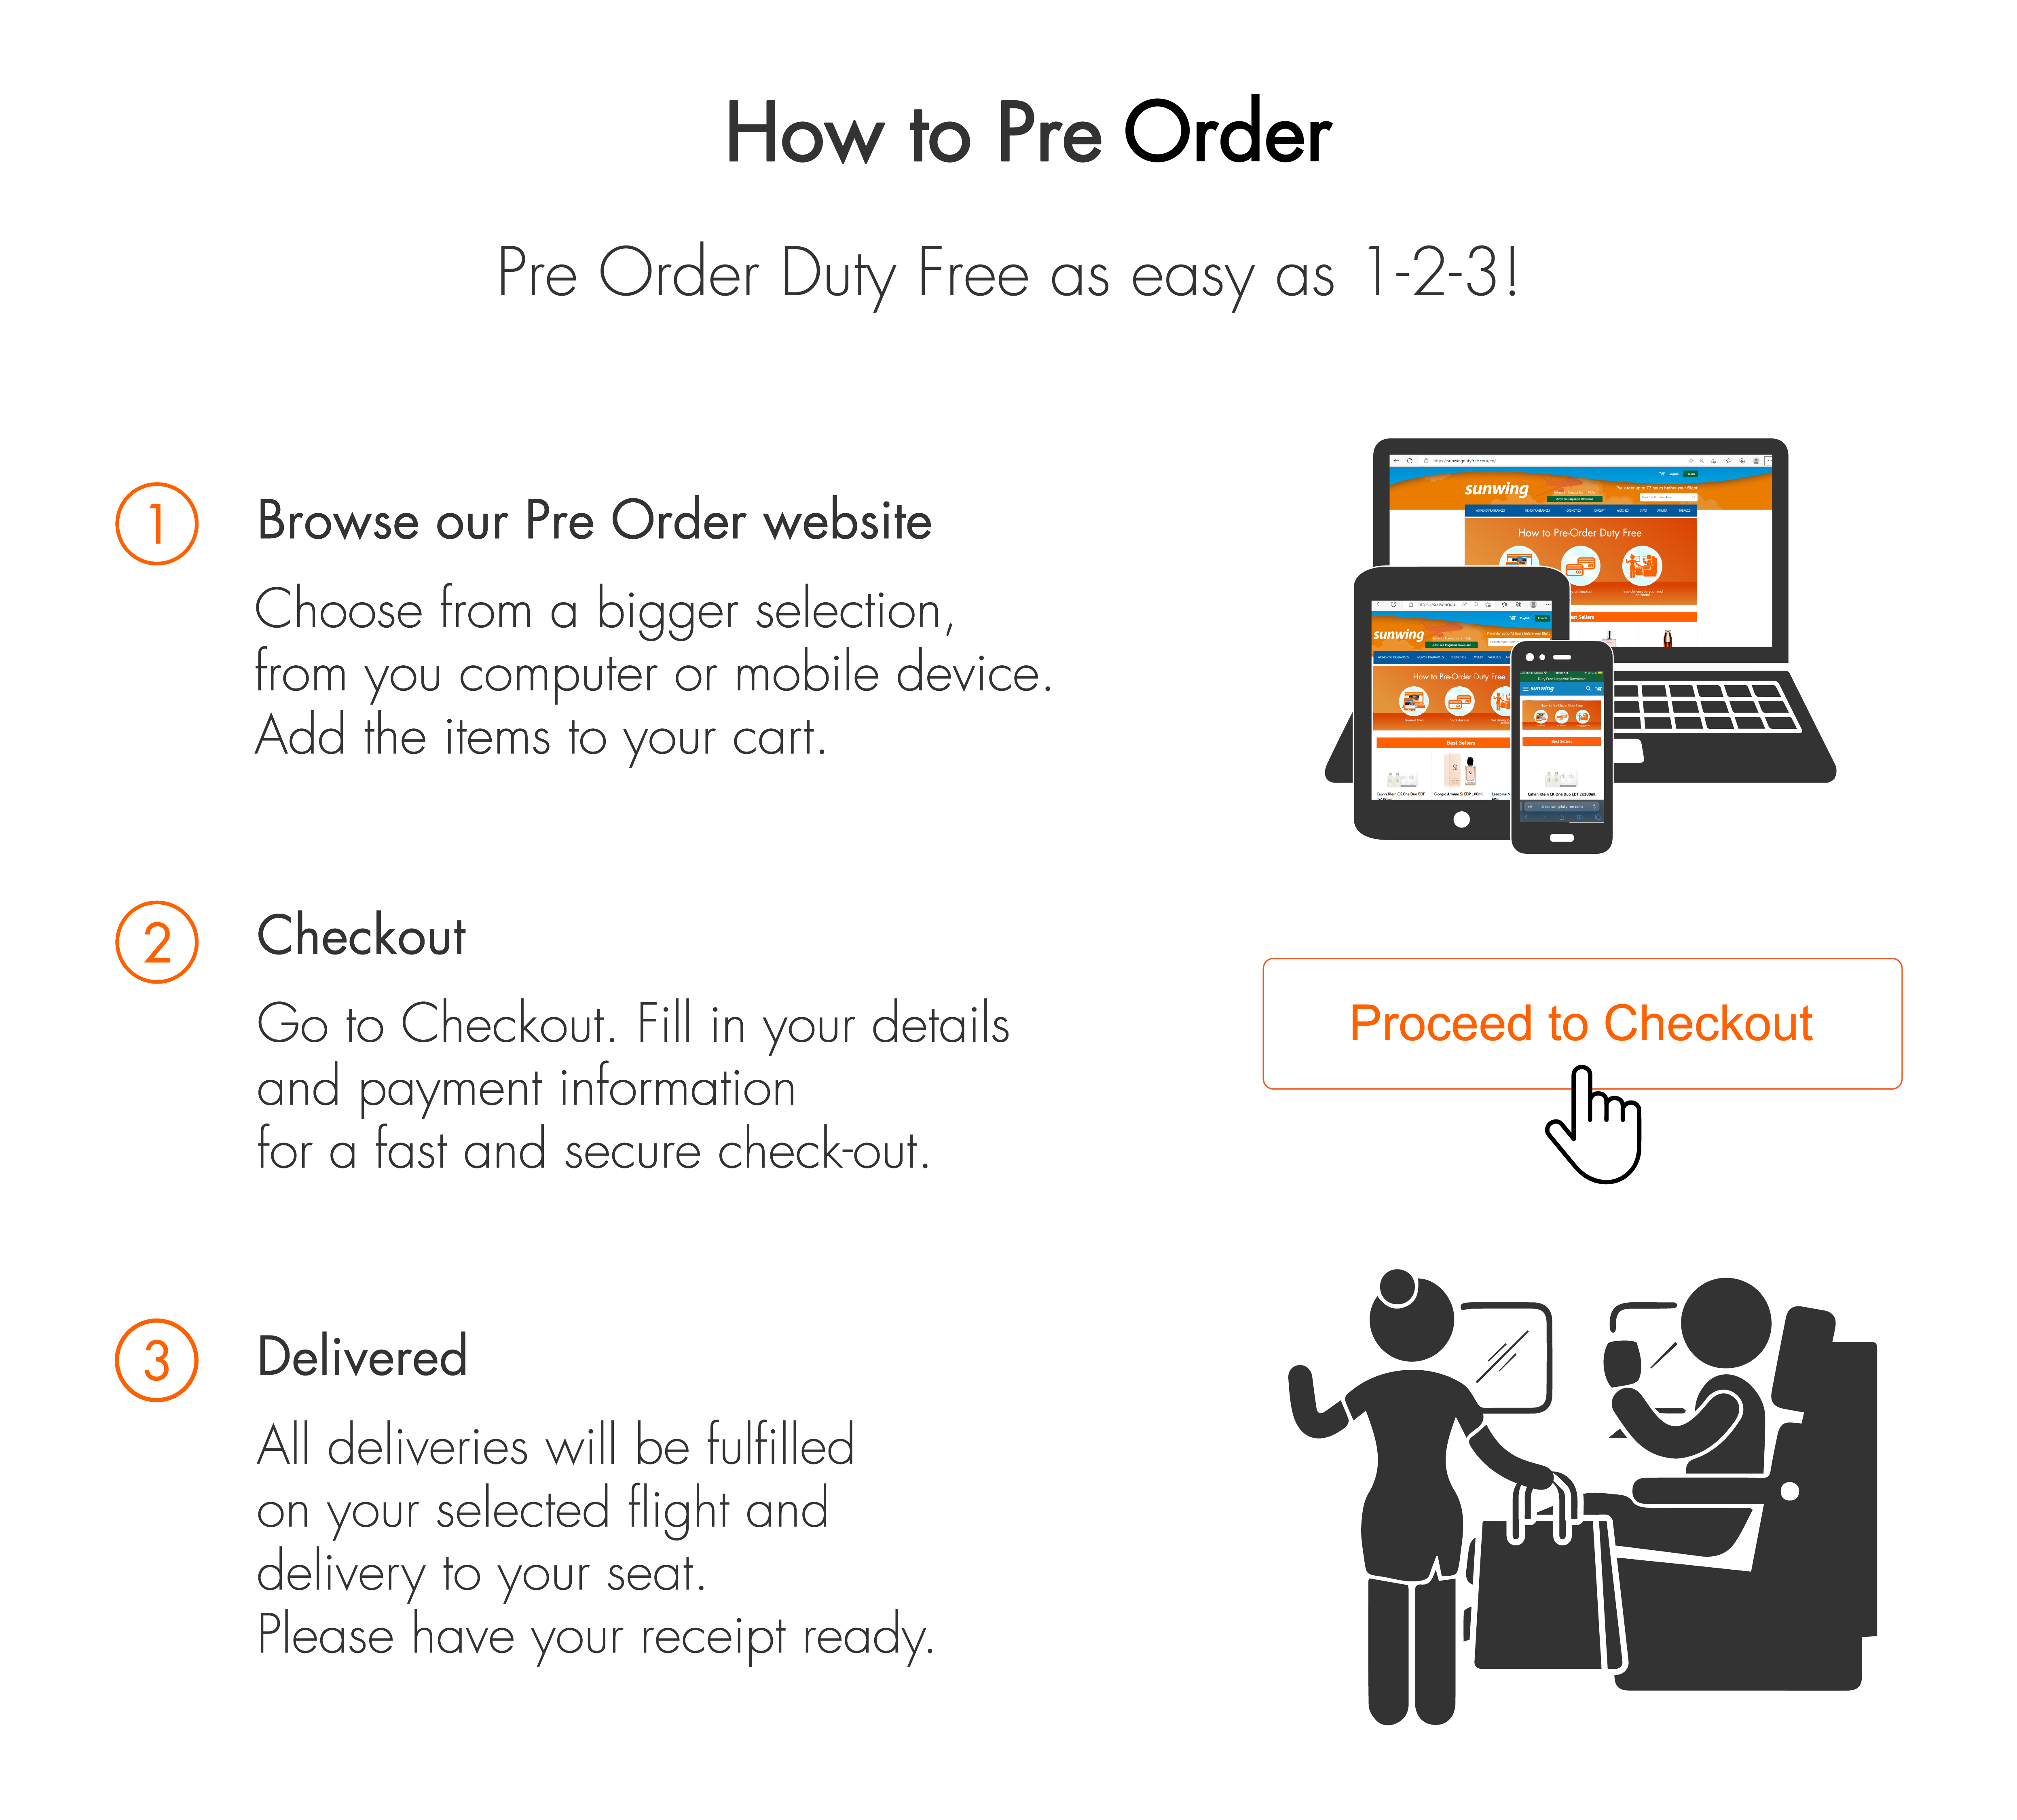 How to pre-order